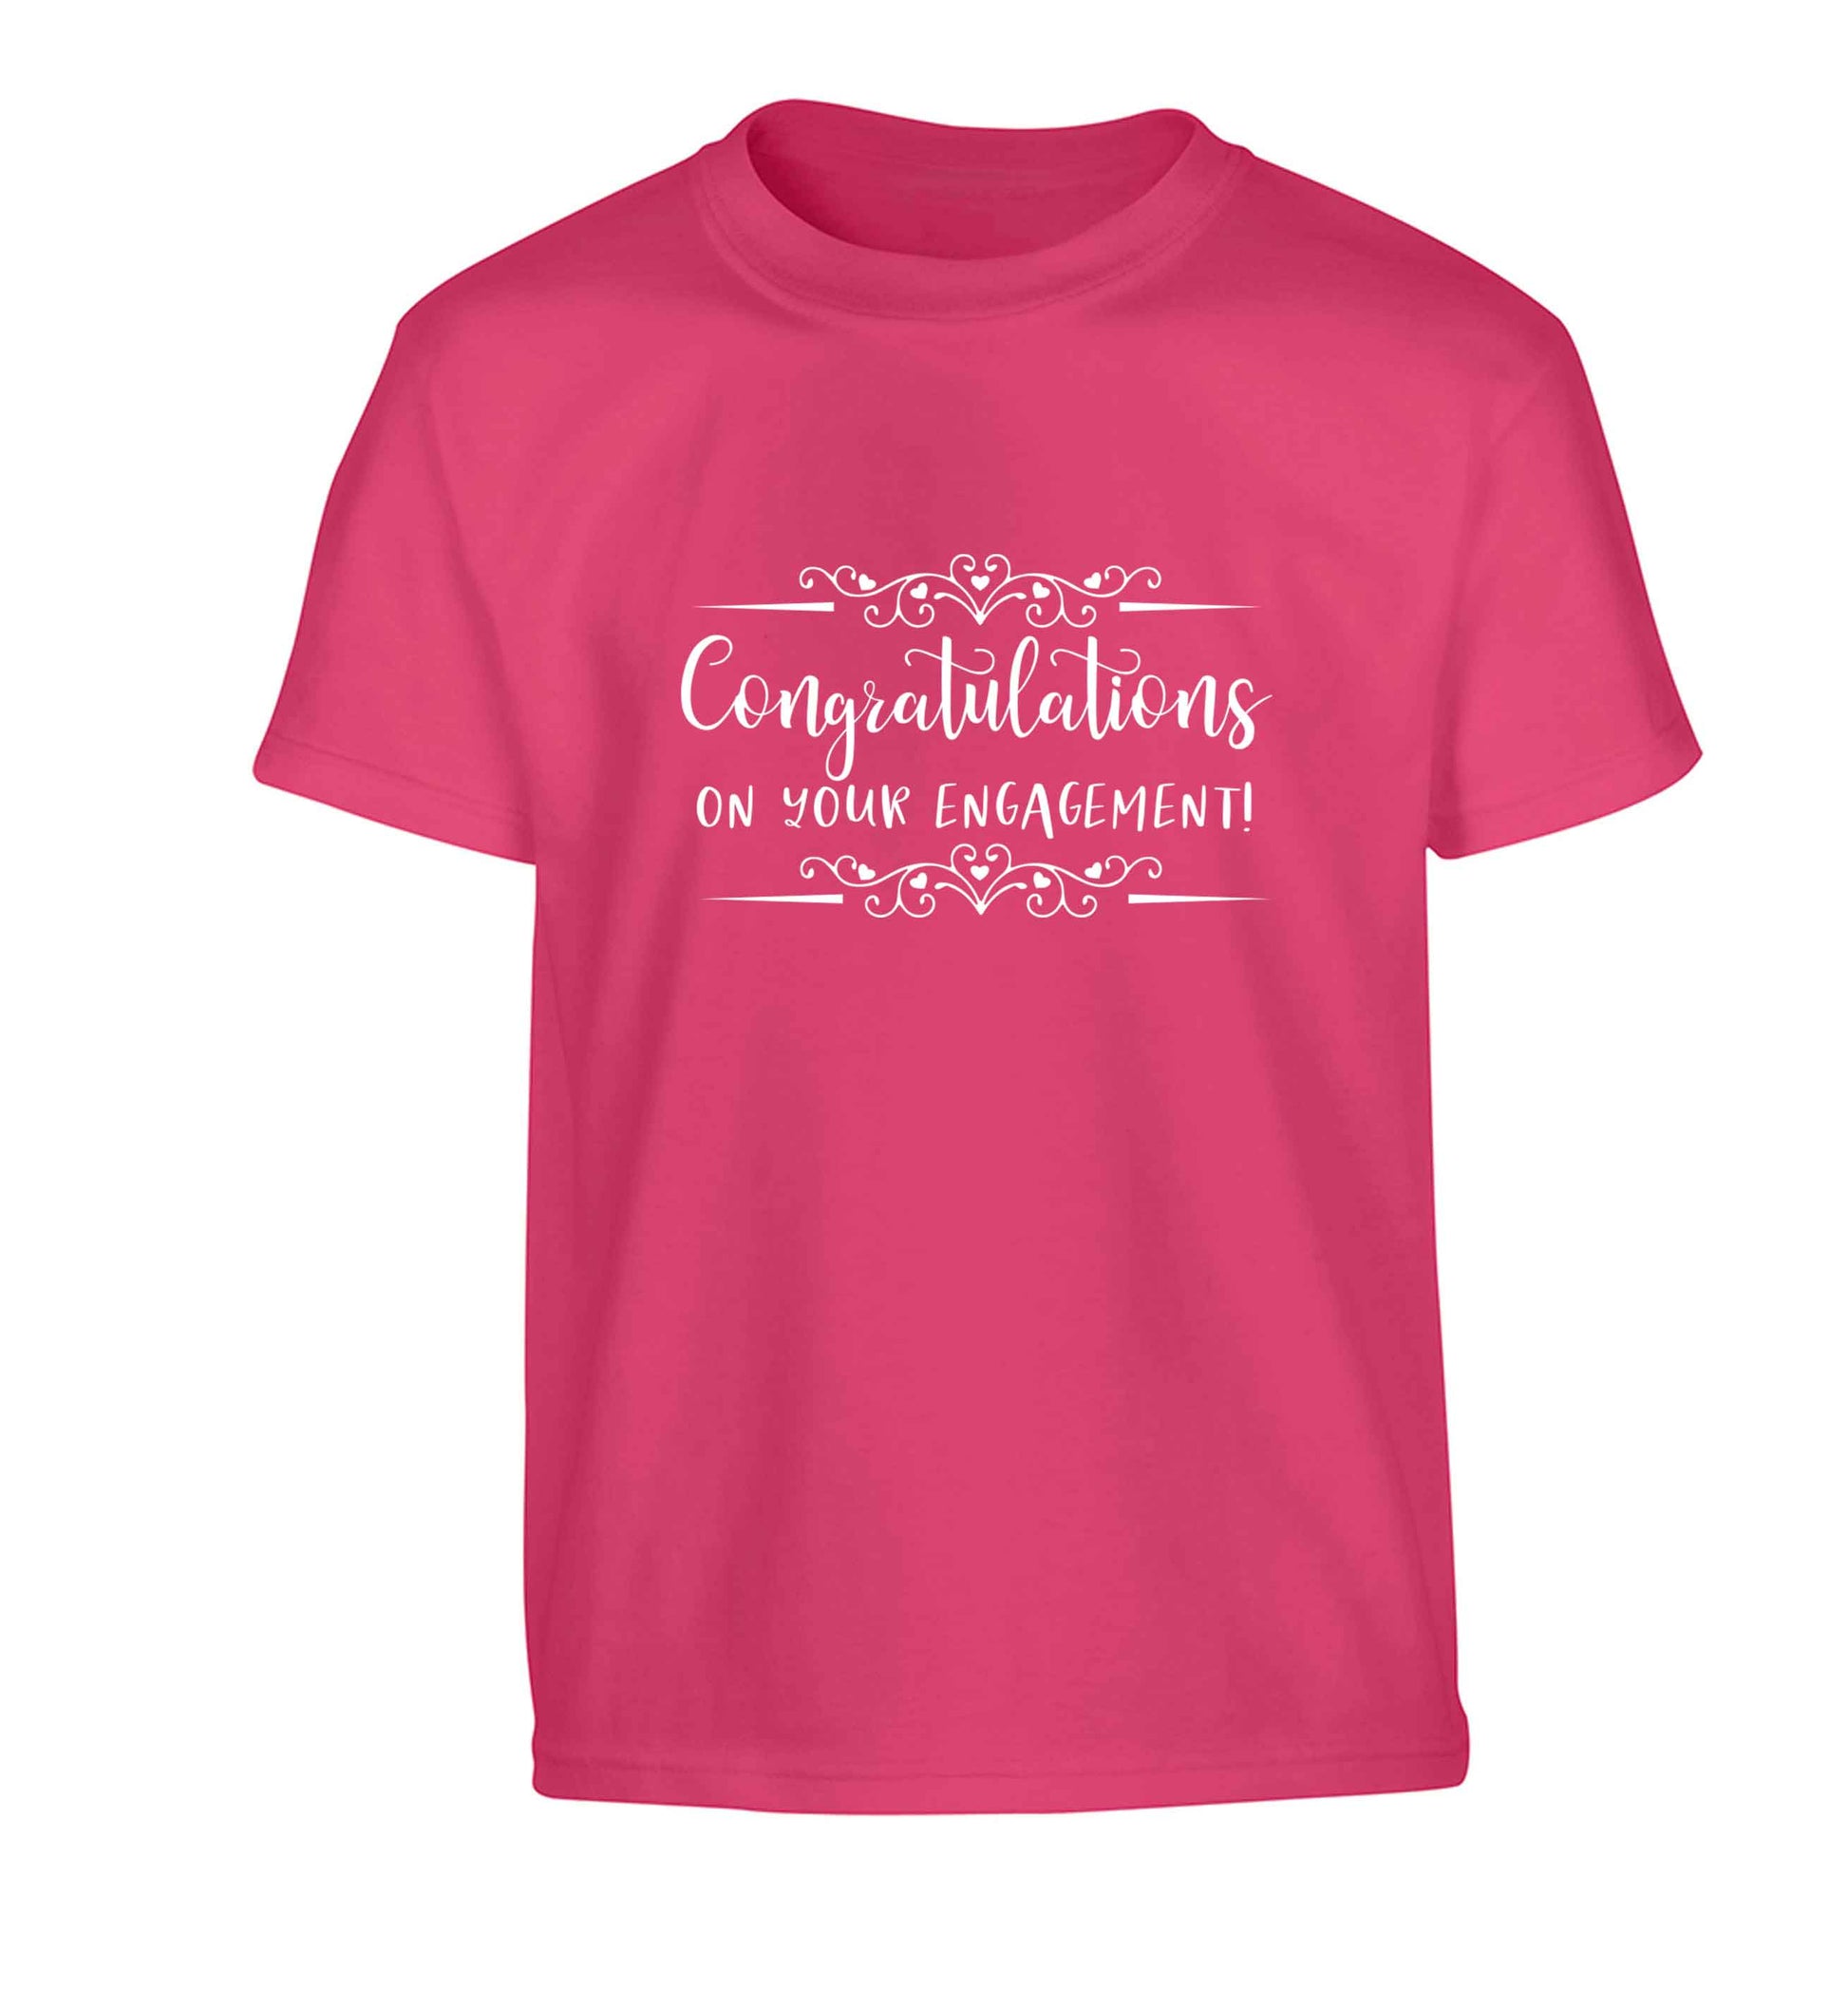 Congratulations on your engagement Children's pink Tshirt 12-13 Years